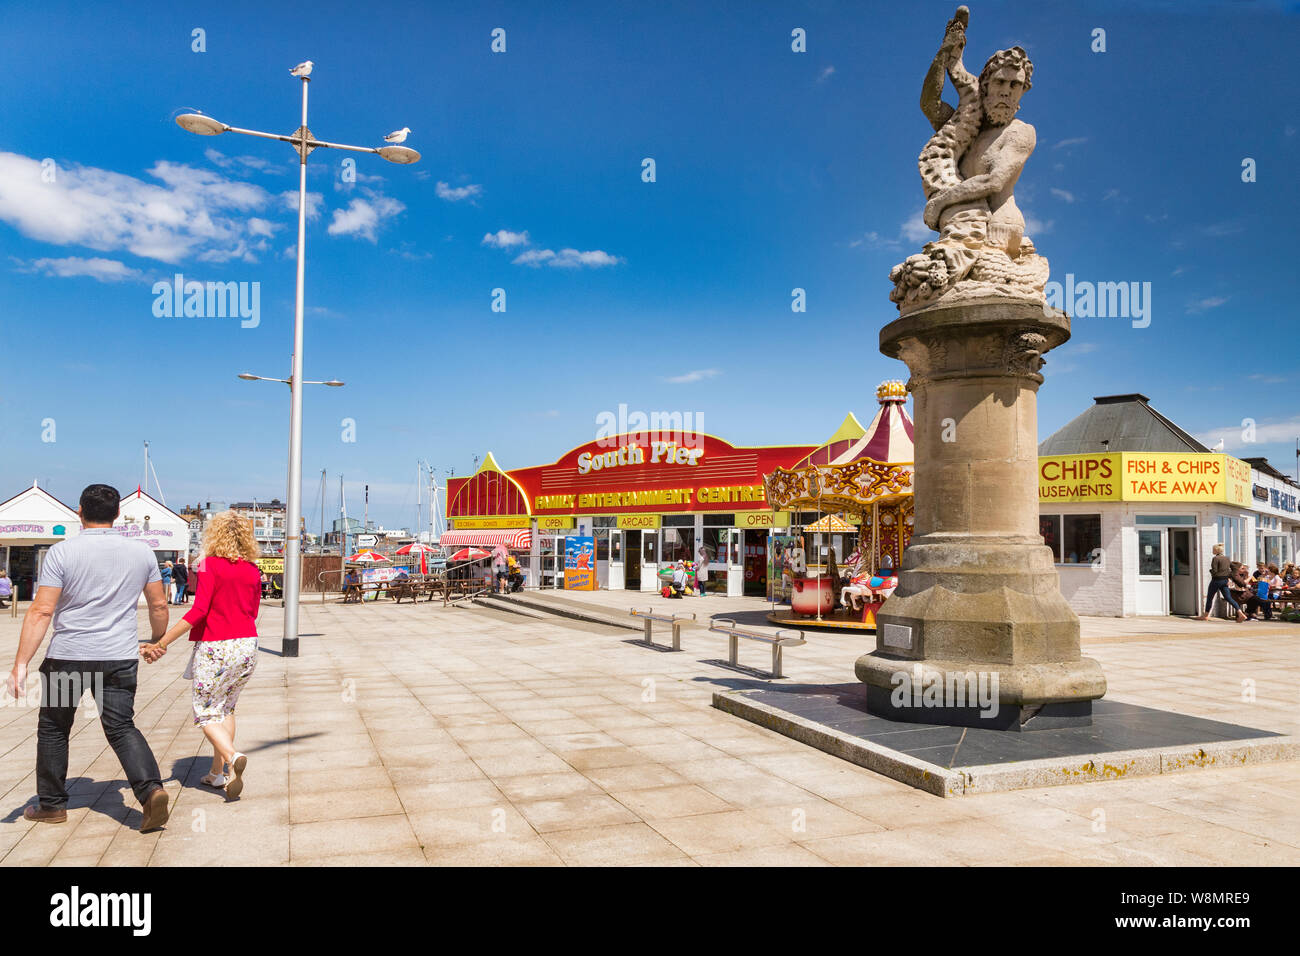 15 June 2019: Lowestoft, Suffolk, UK - A Triton statue on the promenade, with South Pier, amusements and back view of couple holding hands. Stock Photo